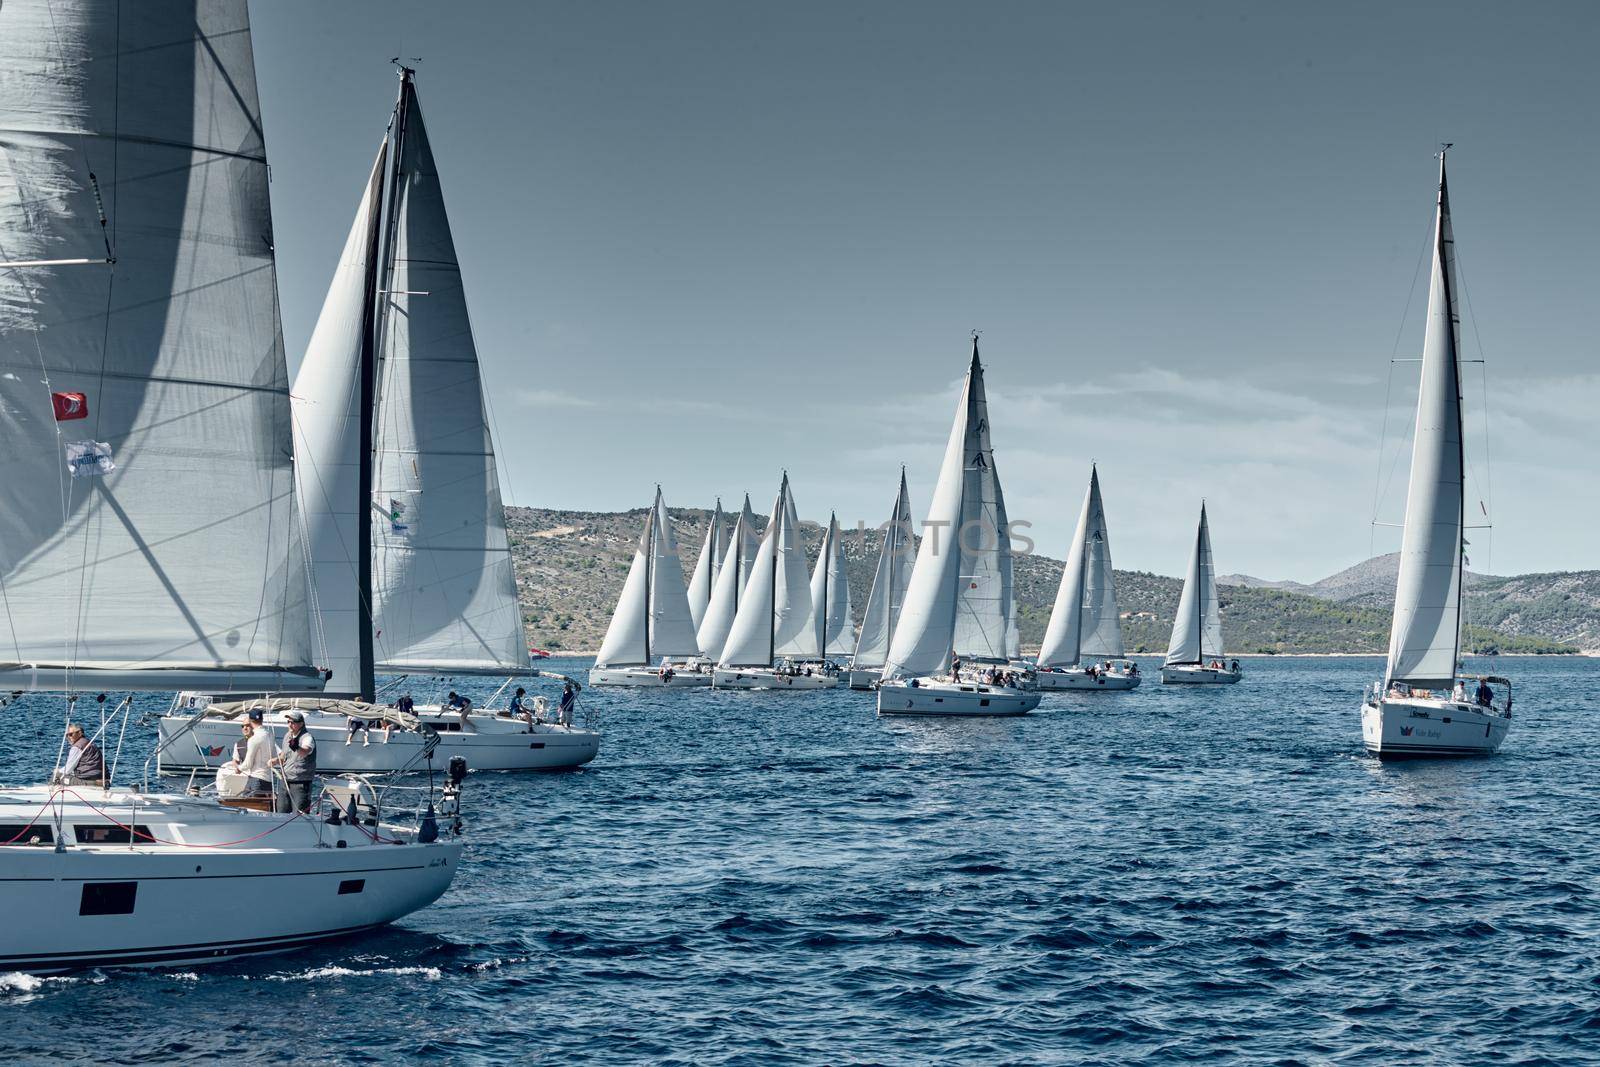 Croatia, Adriatic Sea, 18 September 2019: Sailboats compete in a sail regatta, sailboat race, reflection of sails on water, island is on background, clear weather